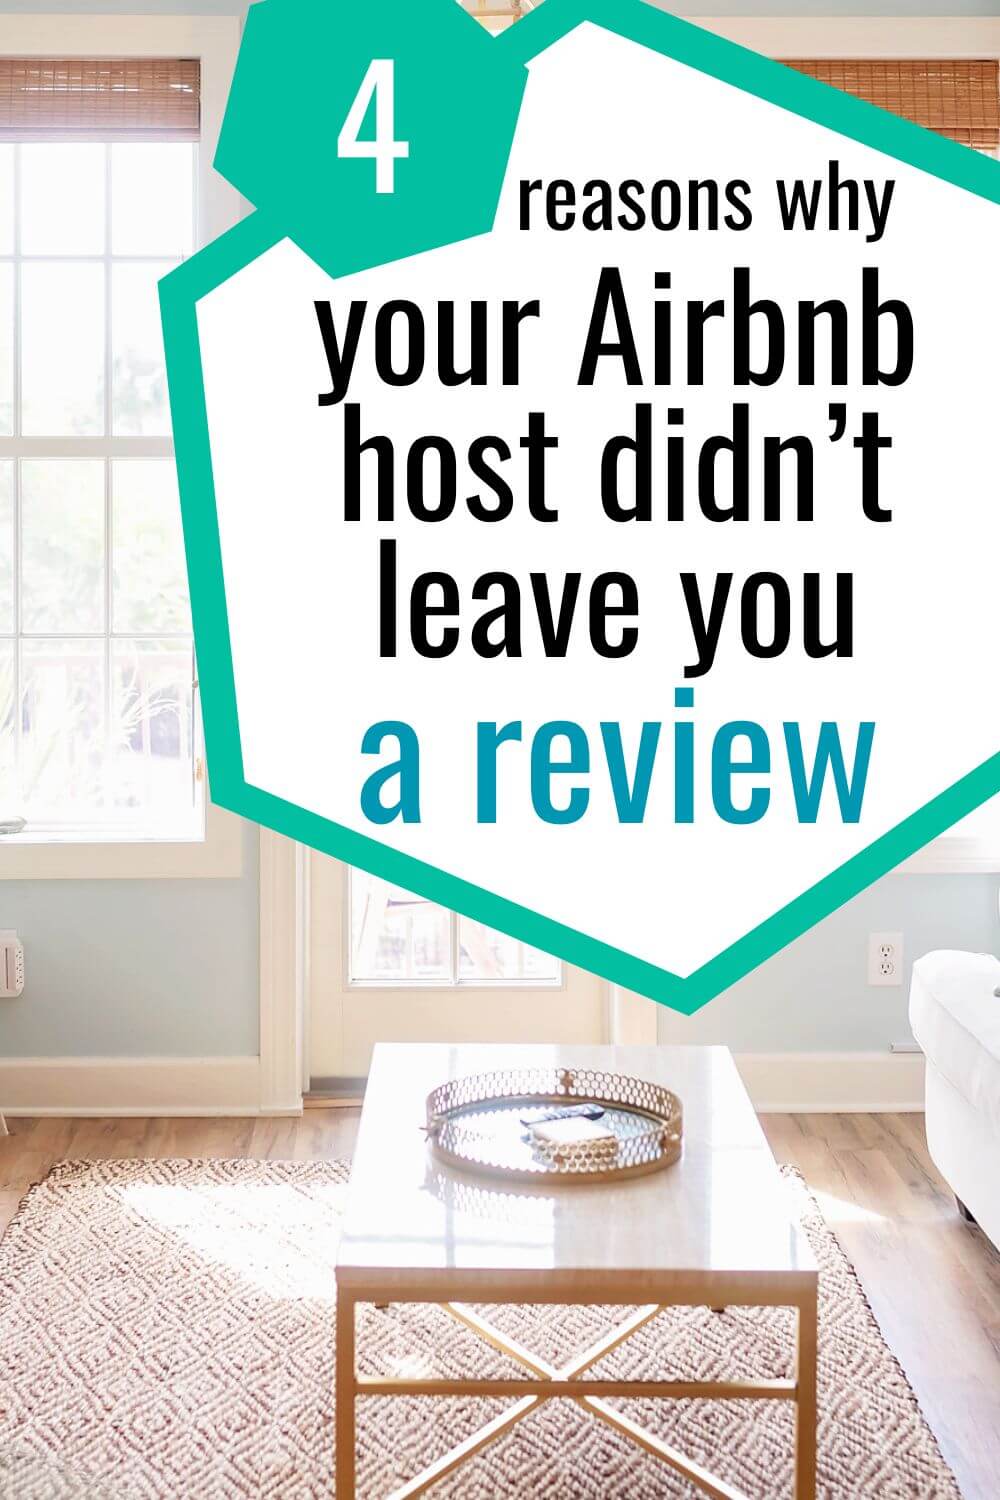 Getting 5 Star Reviews on Airbnb